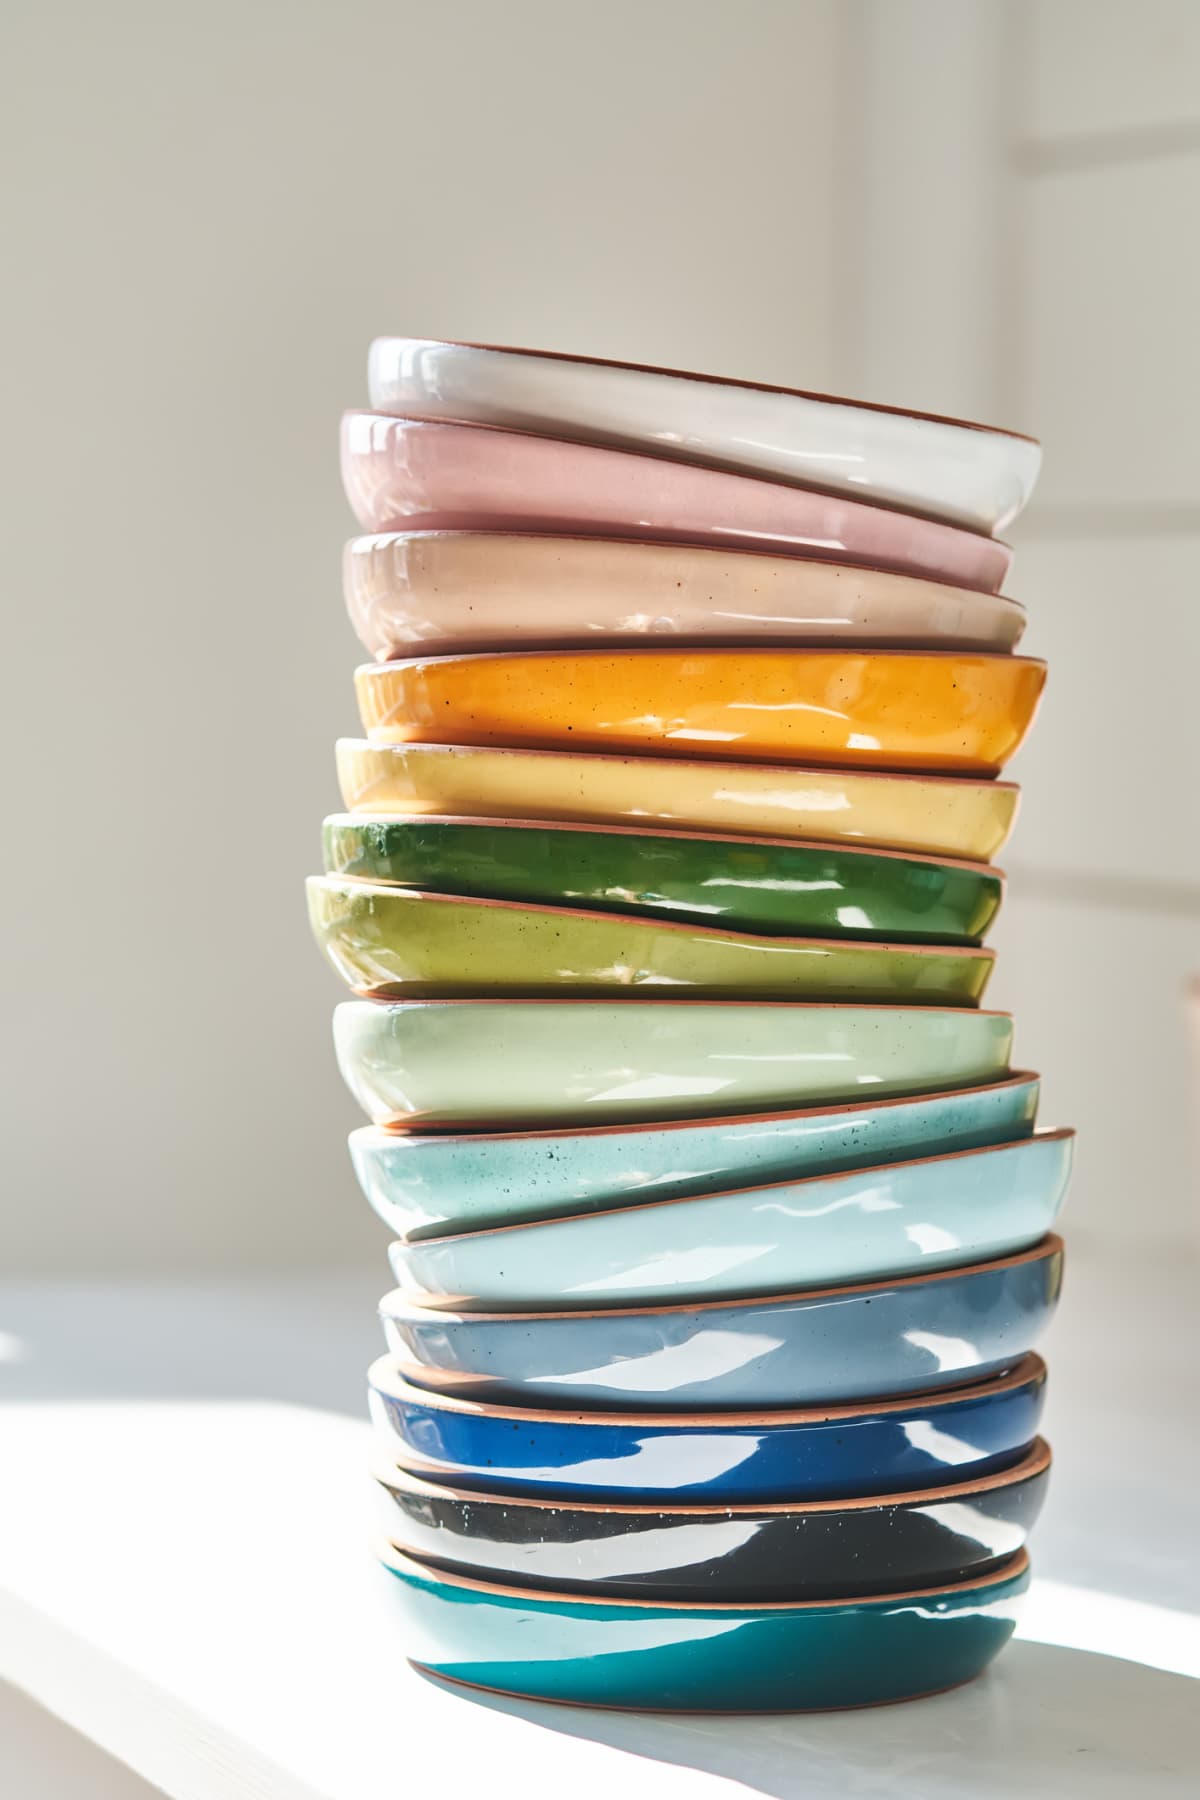 A stack of bright multicolored bowls